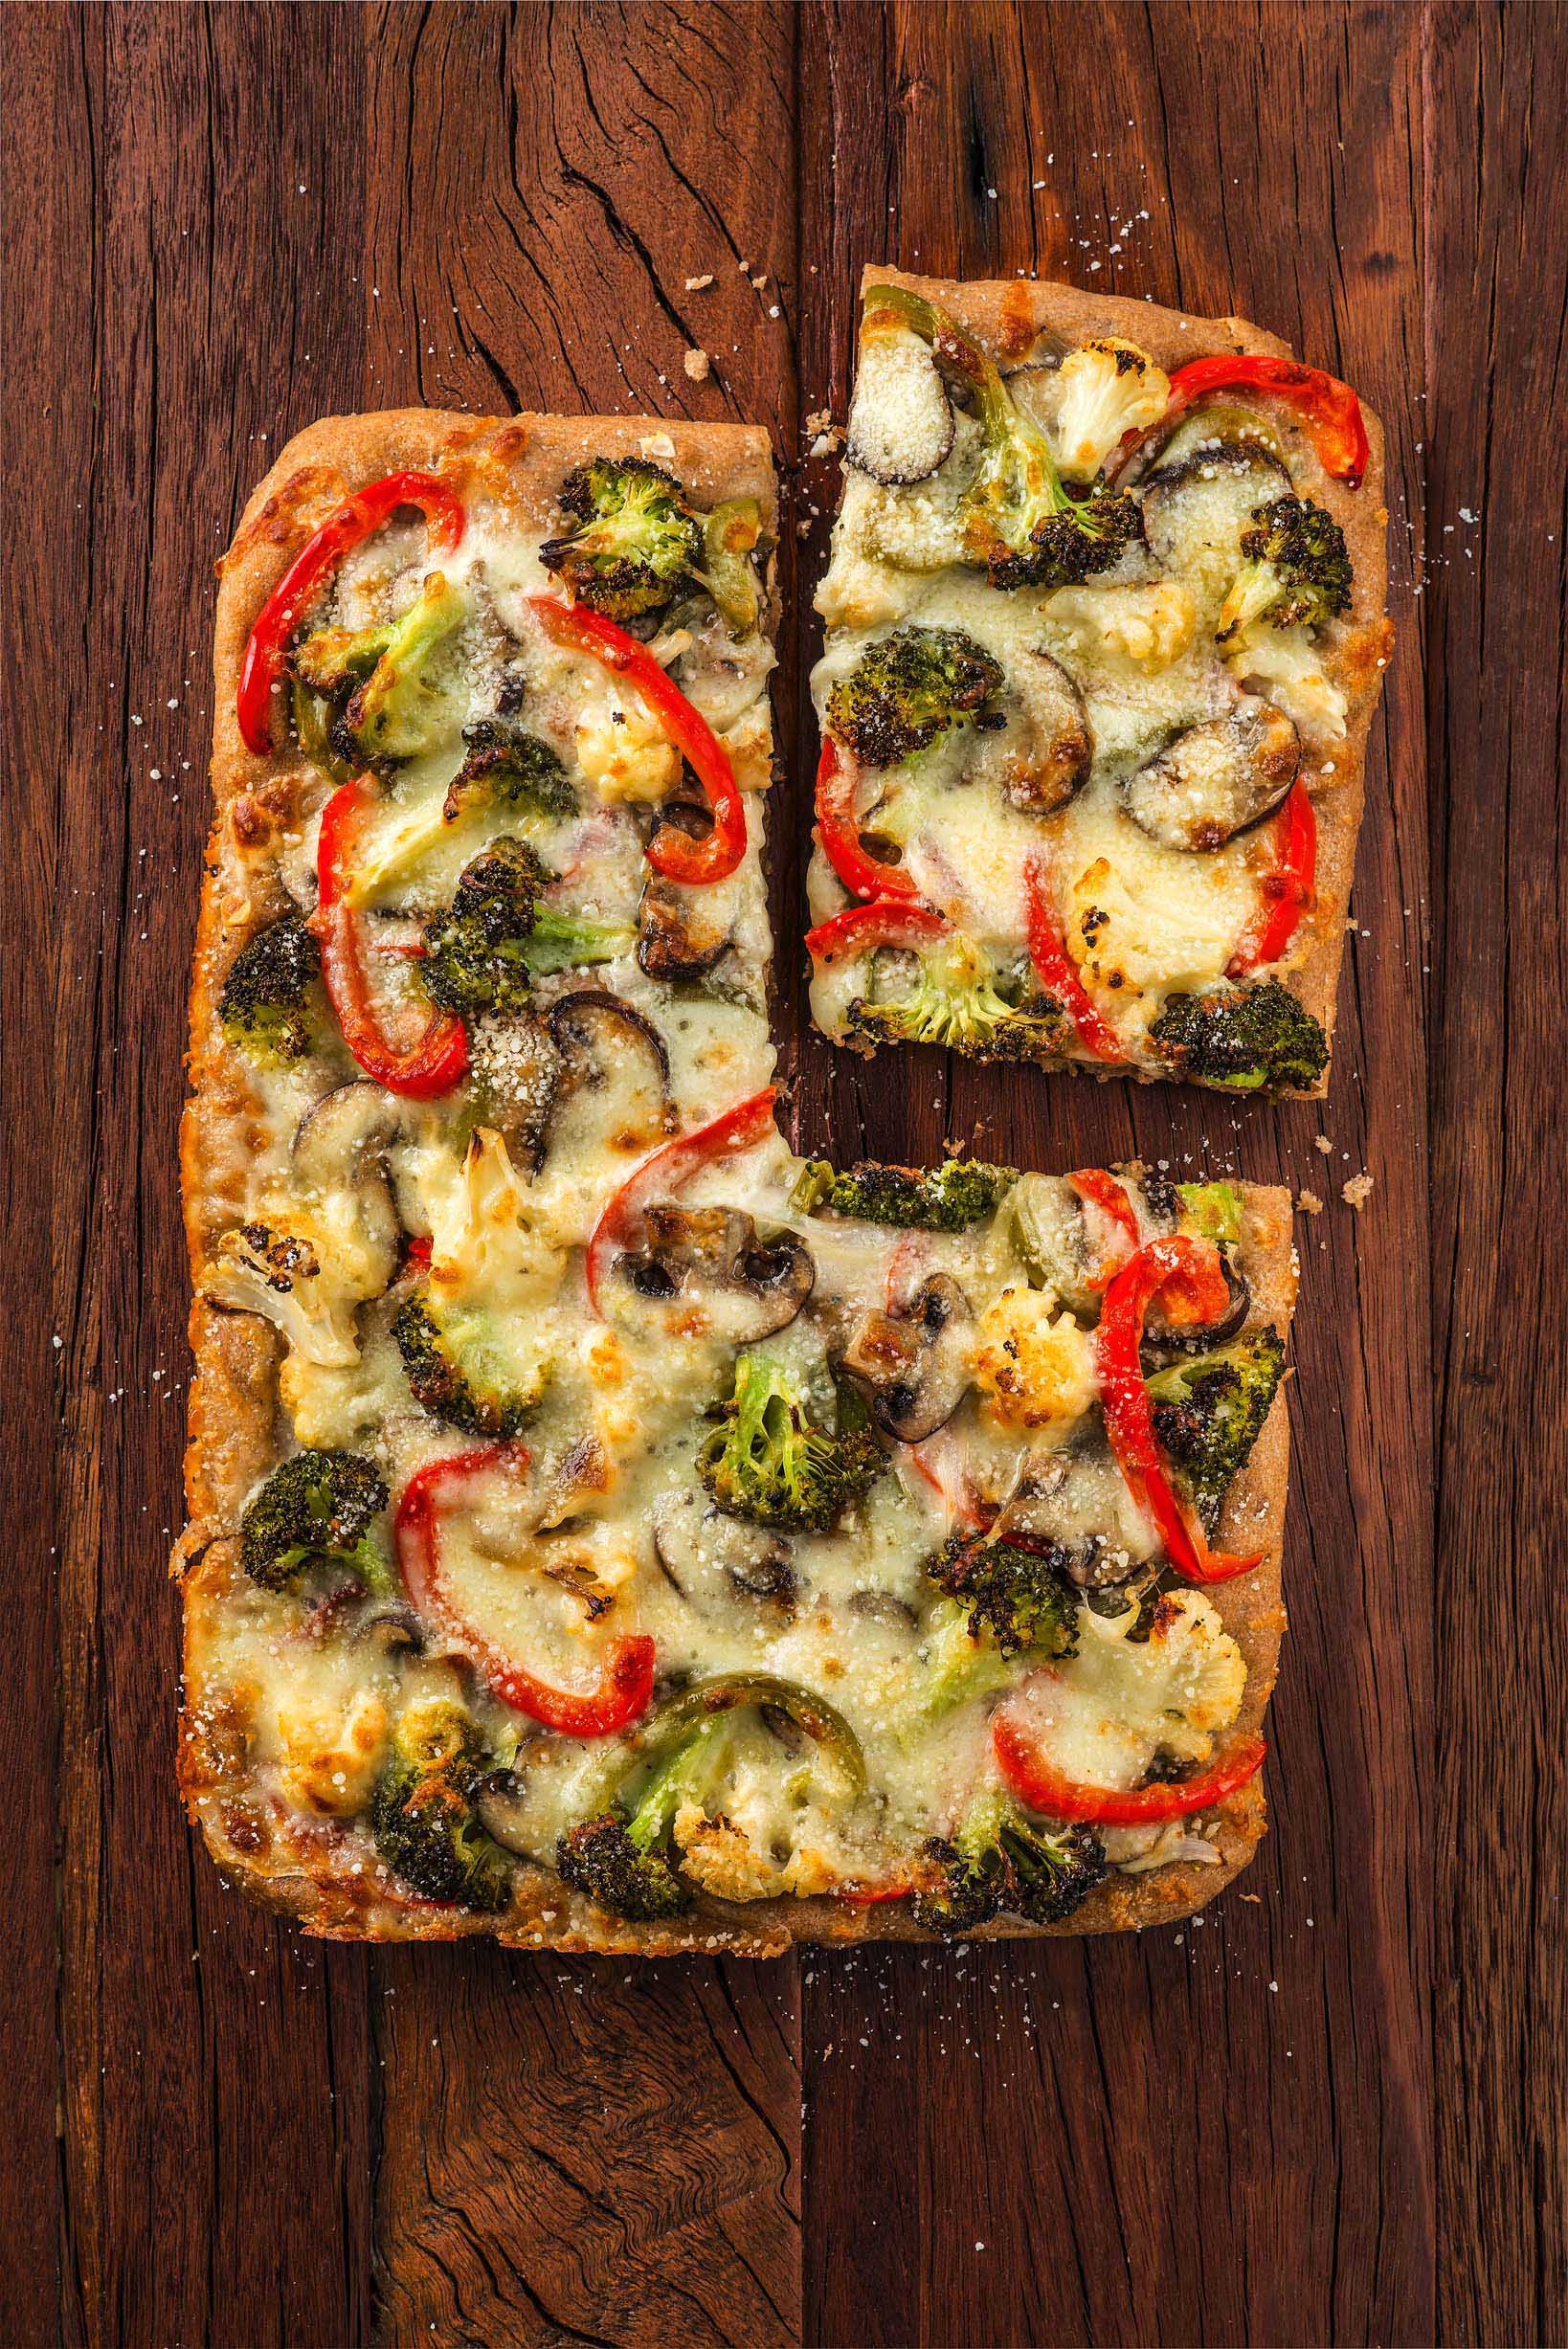 Roasted Vegetable Whole Wheat Pizza